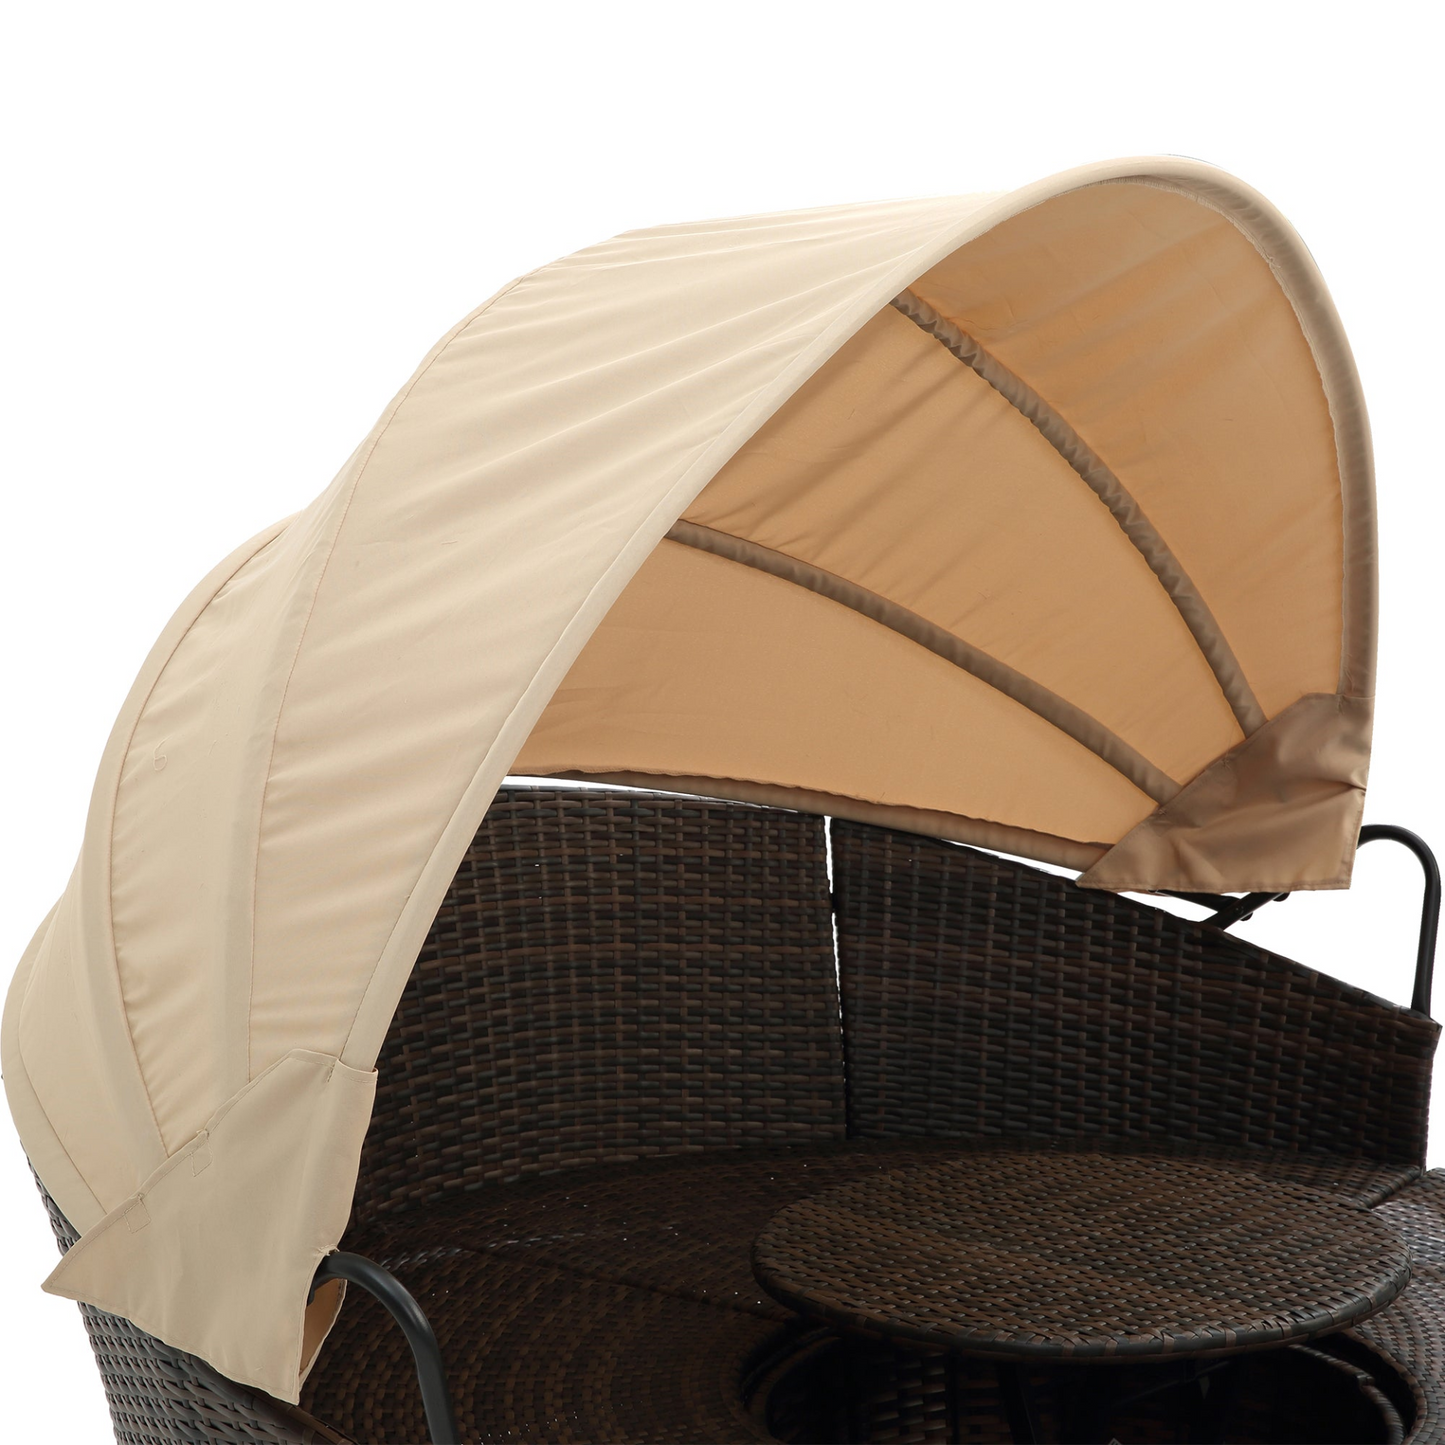 TOPMAX Rattan Round Lounge with Canopy and Lift Coffee Table